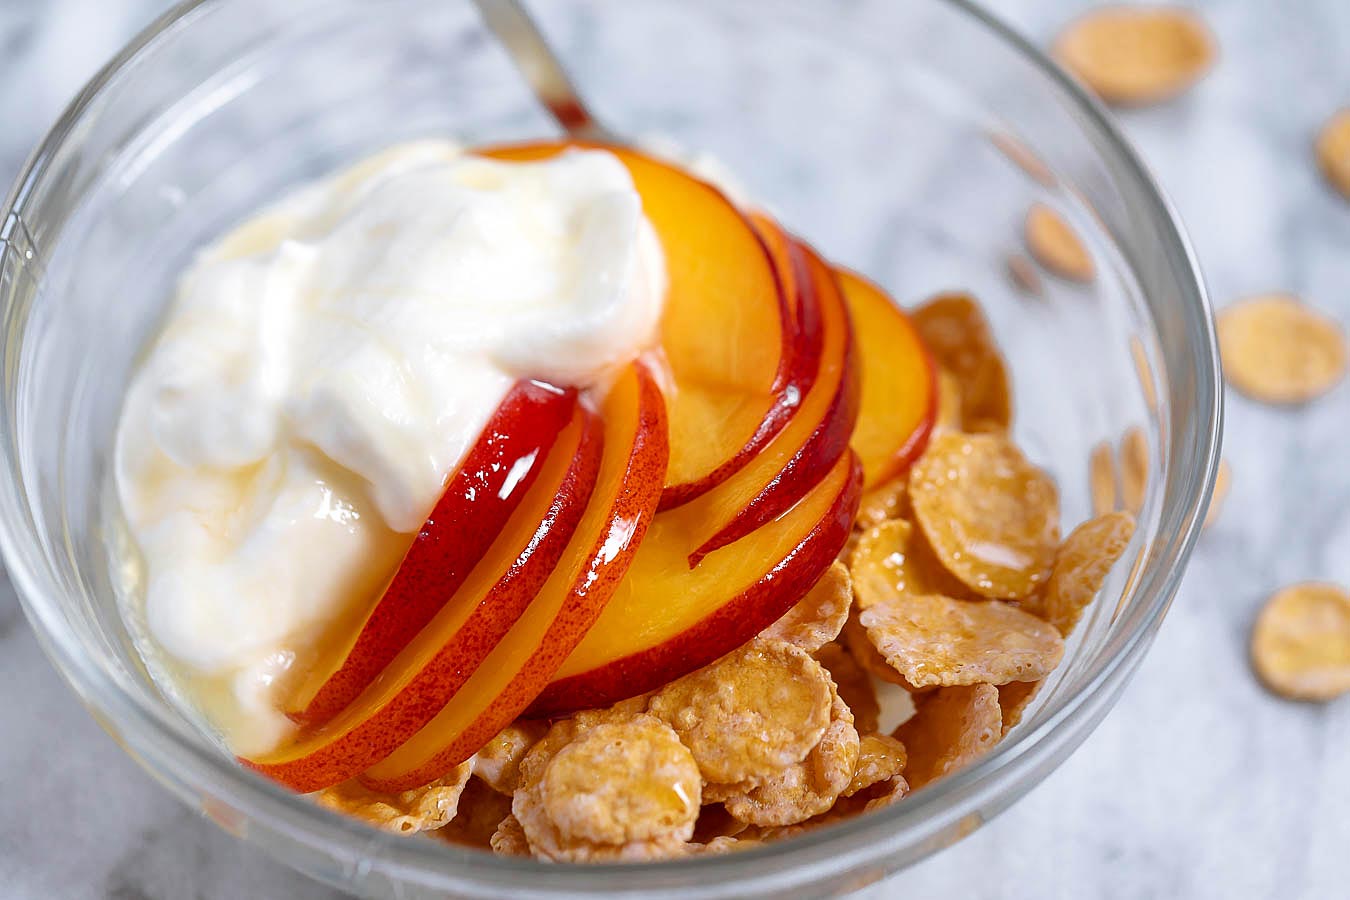 Cereal Breakfast Bowl with Peach and Cream Cheese